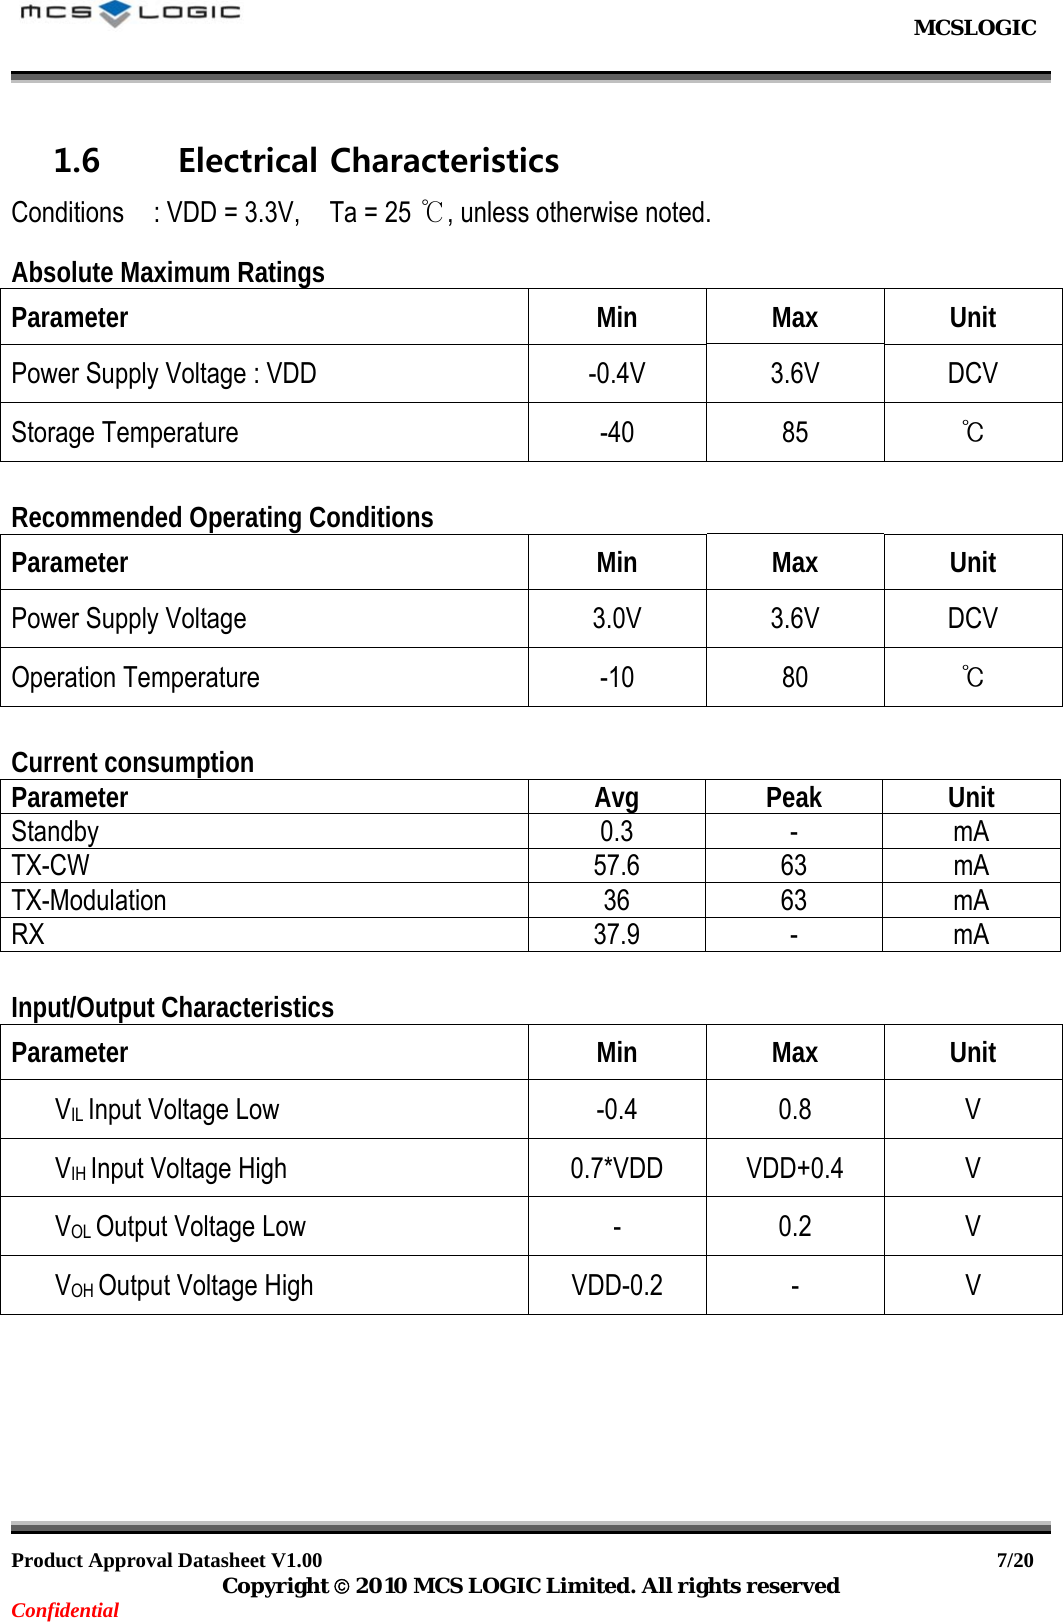                                                           MCSLOGIC                                                                                     Product Approval Datasheet V1.00                                                                  7/20 Copyright © 2010 MCS LOGIC Limited. All rights reserved Confidential 1.6 Electrical Characteristics Conditions    : VDD = 3.3V,    Ta = 25 ℃, unless otherwise noted.  Absolute Maximum Ratings Parameter Min Max Unit Power Supply Voltage : VDD  -0.4V  3.6V  DCV Storage Temperature  -40  85  ℃  Recommended Operating Conditions Parameter Min Max Unit Power Supply Voltage  3.0V  3.6V  DCV Operation Temperature  -10  80  ℃  Current consumption Parameter Avg Peak Unit Standby 0.3 - mA TX-CW 57.6 63 mA TX-Modulation 36 63 mA RX 37.9 - mA  Input/Output Characteristics Parameter Min Max Unit VIL Input Voltage Low  -0.4  0.8  V VIH Input Voltage High  0.7*VDD  VDD+0.4  V VOL Output Voltage Low  -  0.2  V VOH Output Voltage High  VDD-0.2  -  V        